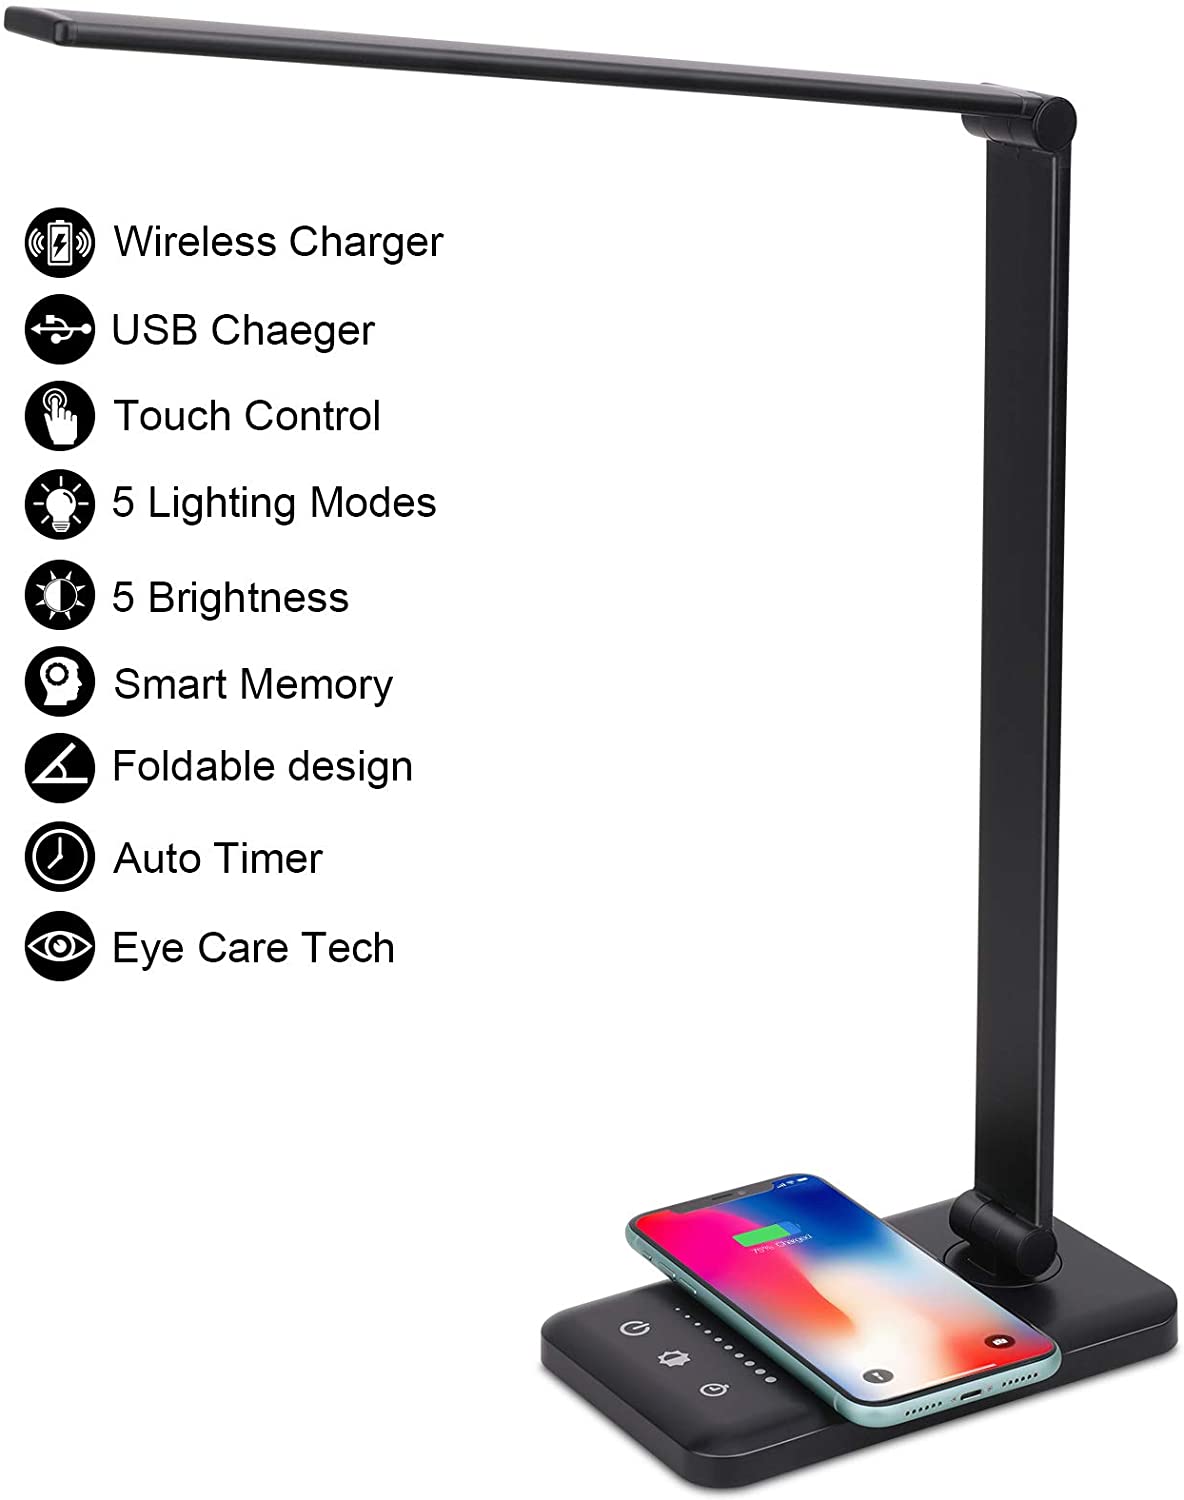 Foldable Desk Lamp with Wireless Charger & USB Port